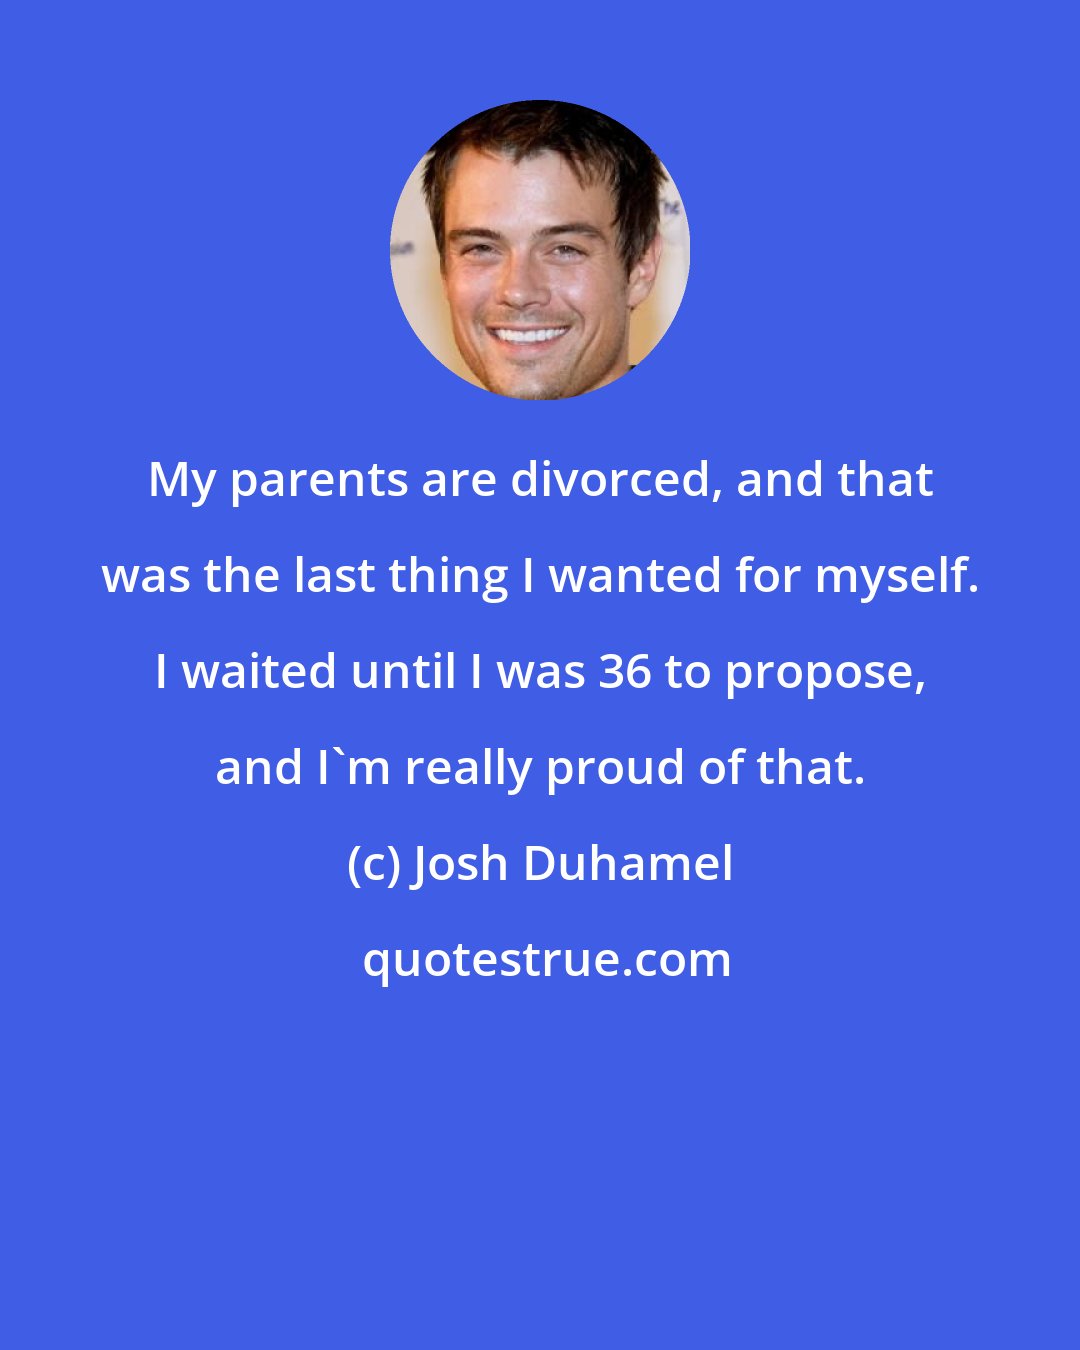 Josh Duhamel: My parents are divorced, and that was the last thing I wanted for myself. I waited until I was 36 to propose, and I'm really proud of that.